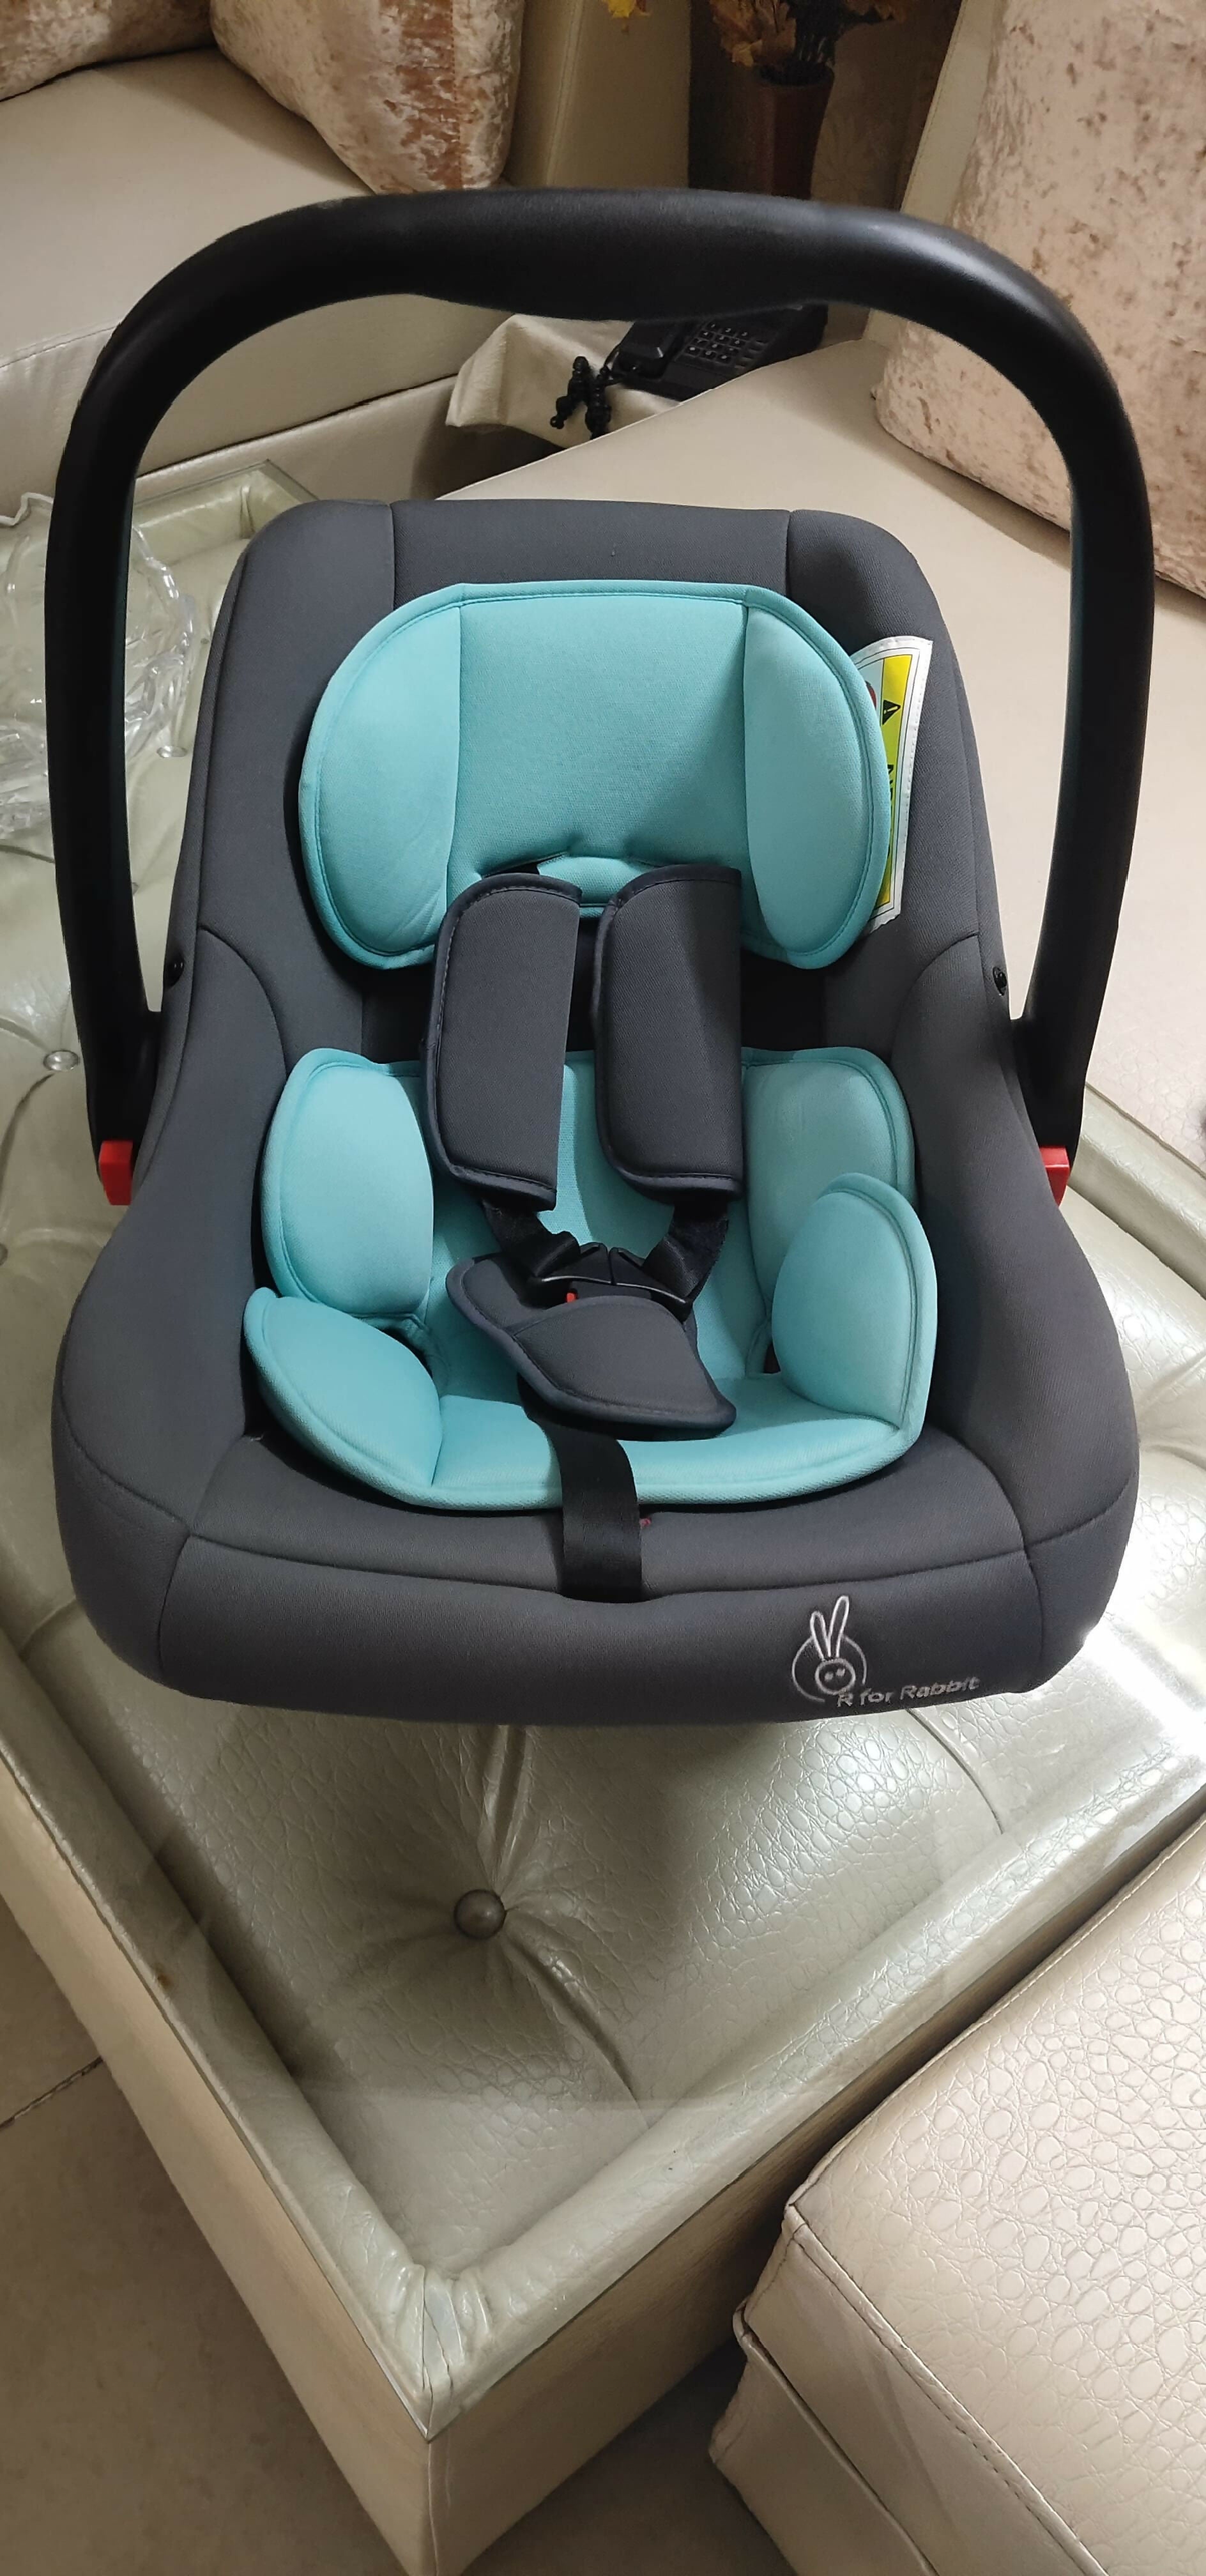 R FOR RABBIT Picaboo 4 In 1 Baby Carry Cot Cum Car Seat - PyaraBaby